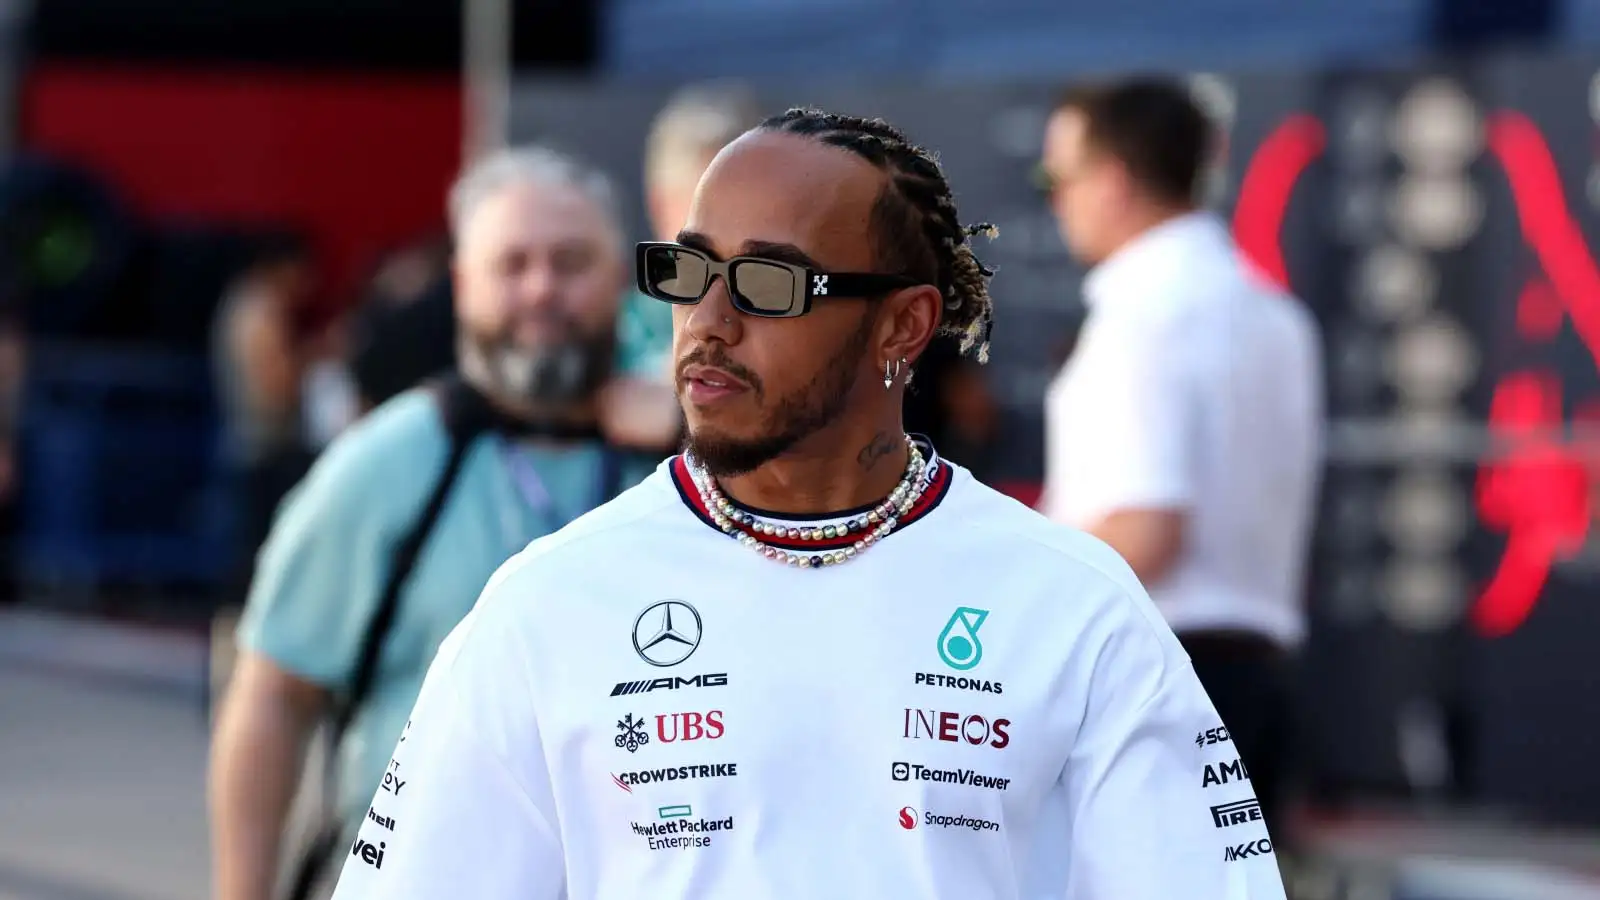 Lewis Hamilton arrives in the paddock at COTA.